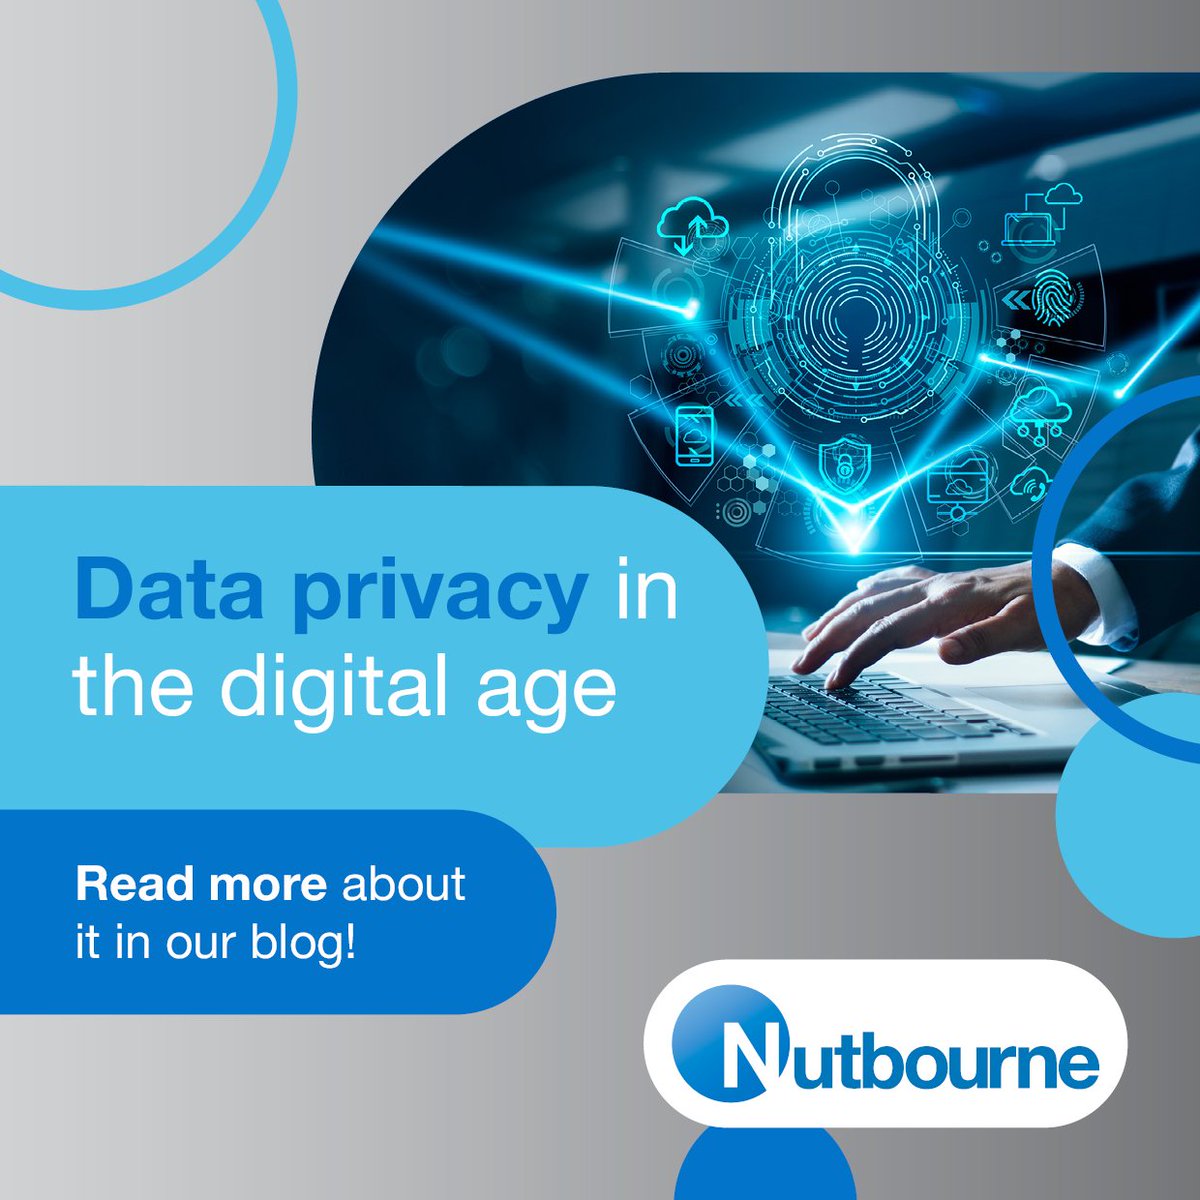 Data privacy is important for SMEs for a variety of reasons, ranging from legal compliance and protecting customer trust, to avoiding reputational damage, and safeguarding sensitive information. Continue reading our latest blog post at this link - nutbourne.com/2023/06/07/dat…